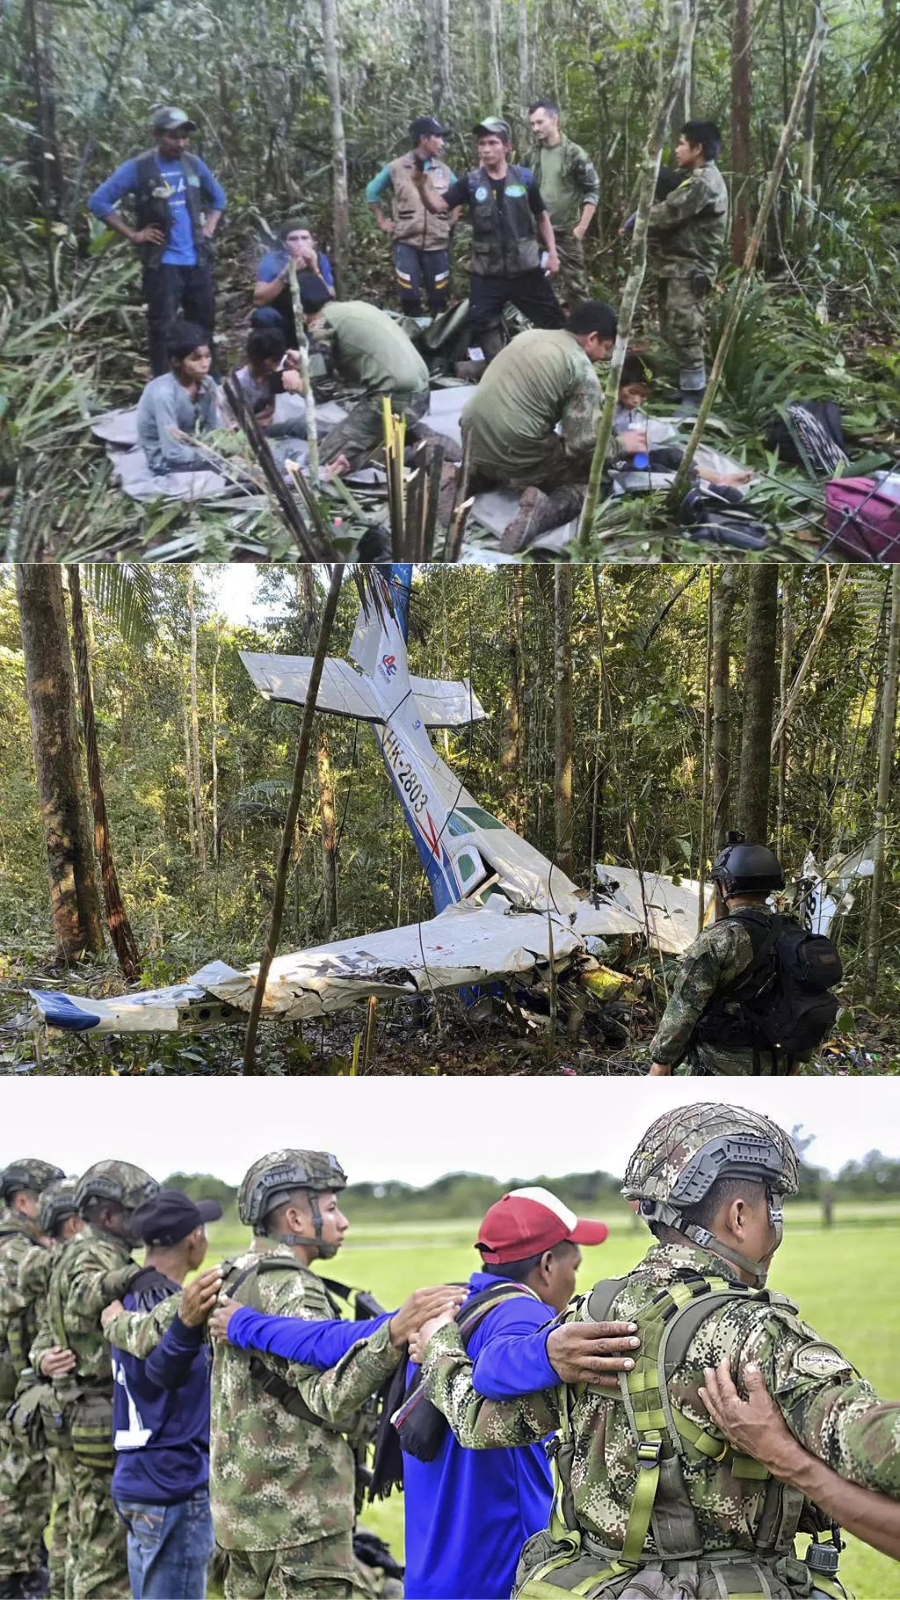 missing children: Colombian president says four children found alive  in  jungle 40 days after plane crash